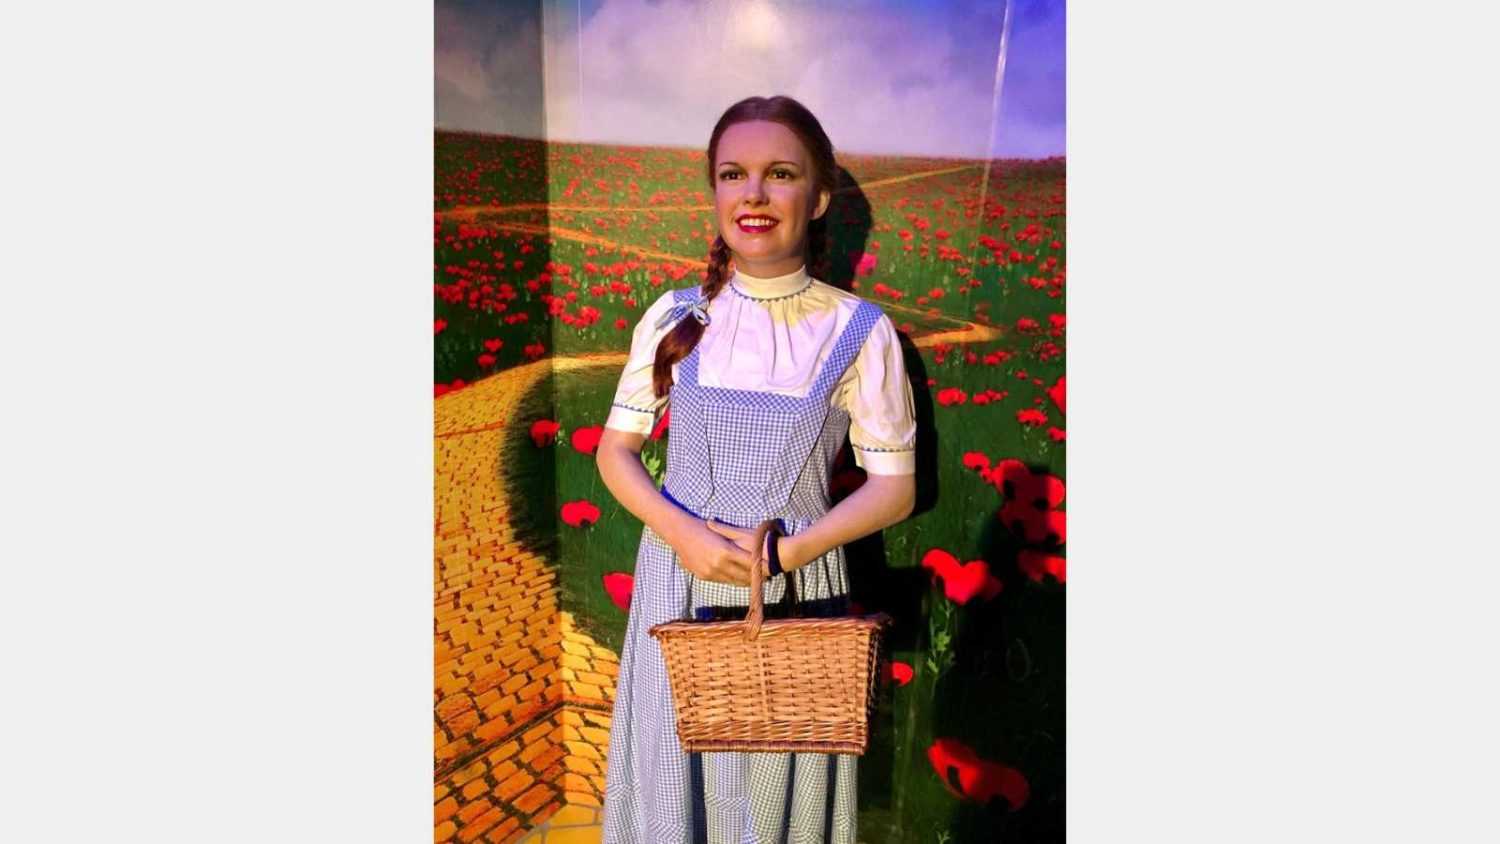 New York, NY, USA - October 2014: Judy Garland, american actress and singer as Dorothy from The Wizard of Oz, in the Madame Tussaud wax museum, TImes Square, New York City.